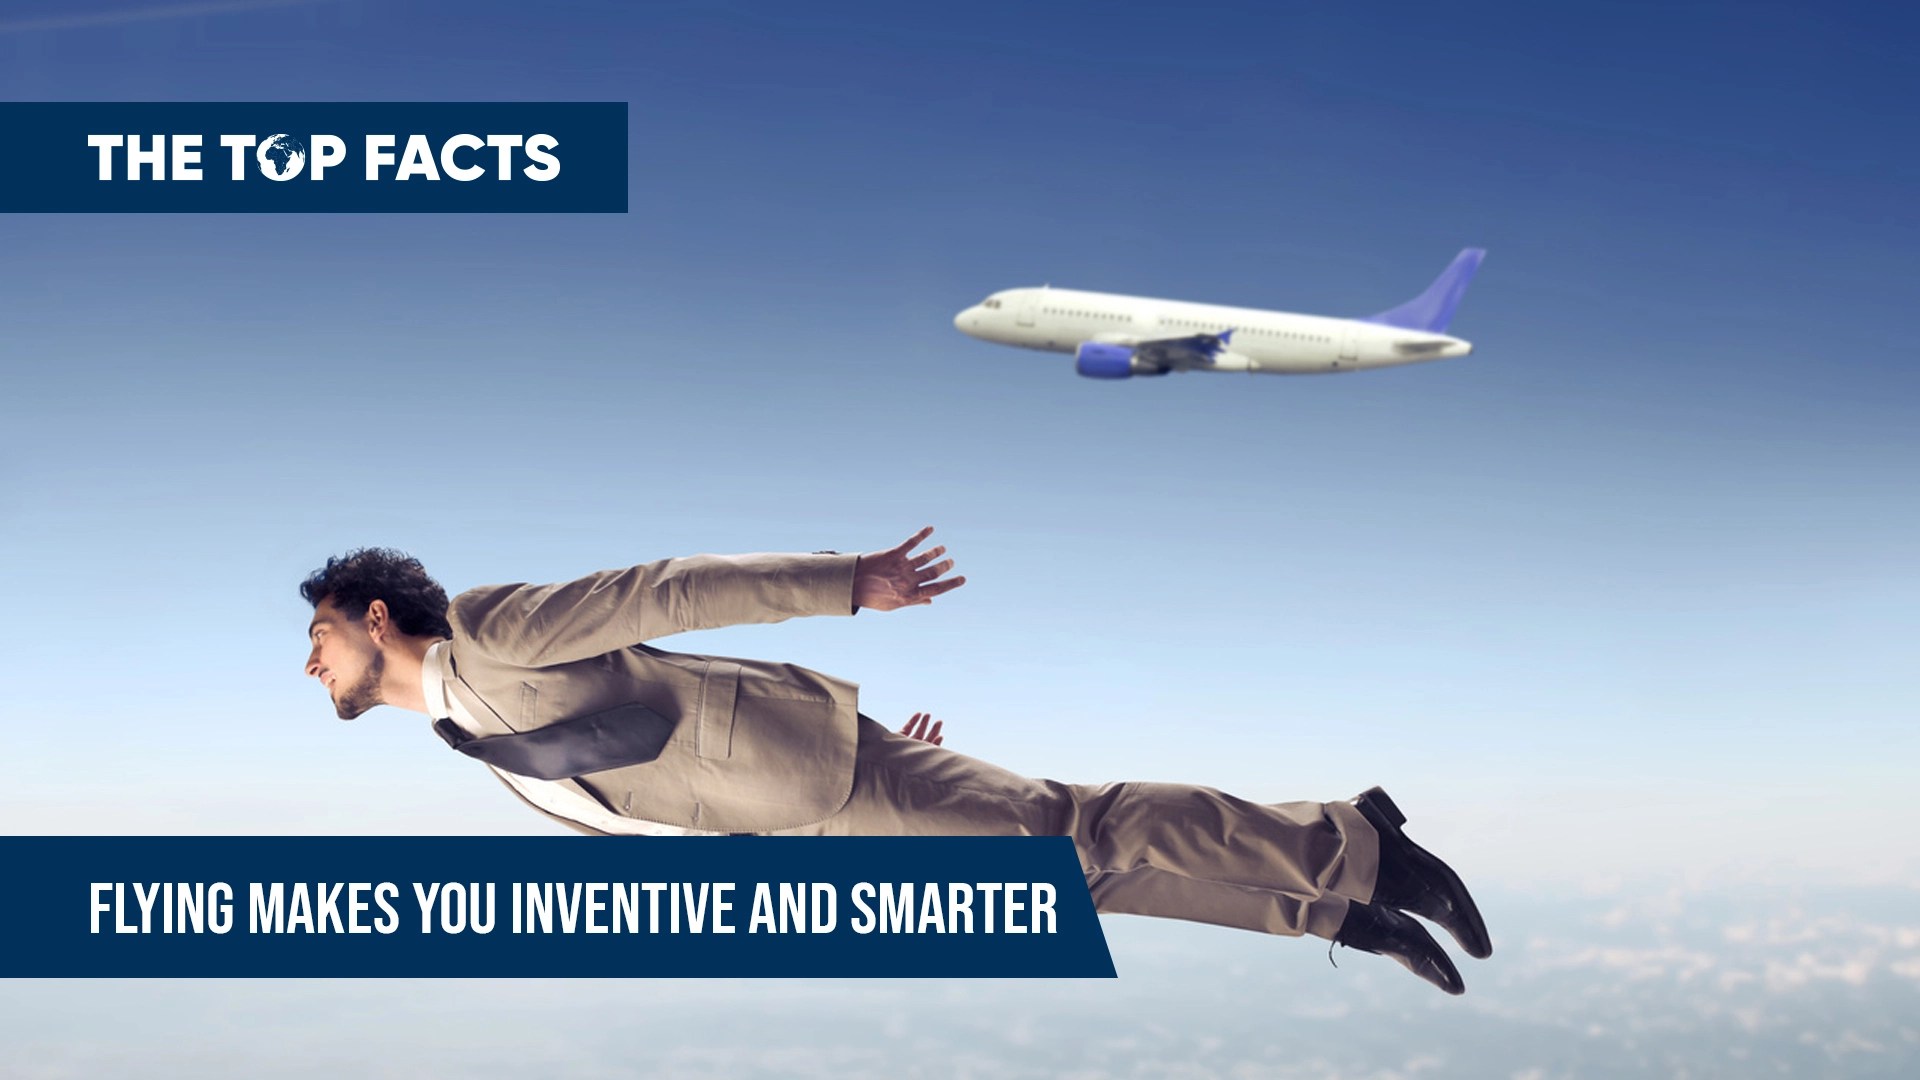 Experience the benefits of air travel, including increased creativity and enhanced cognitive abilities.